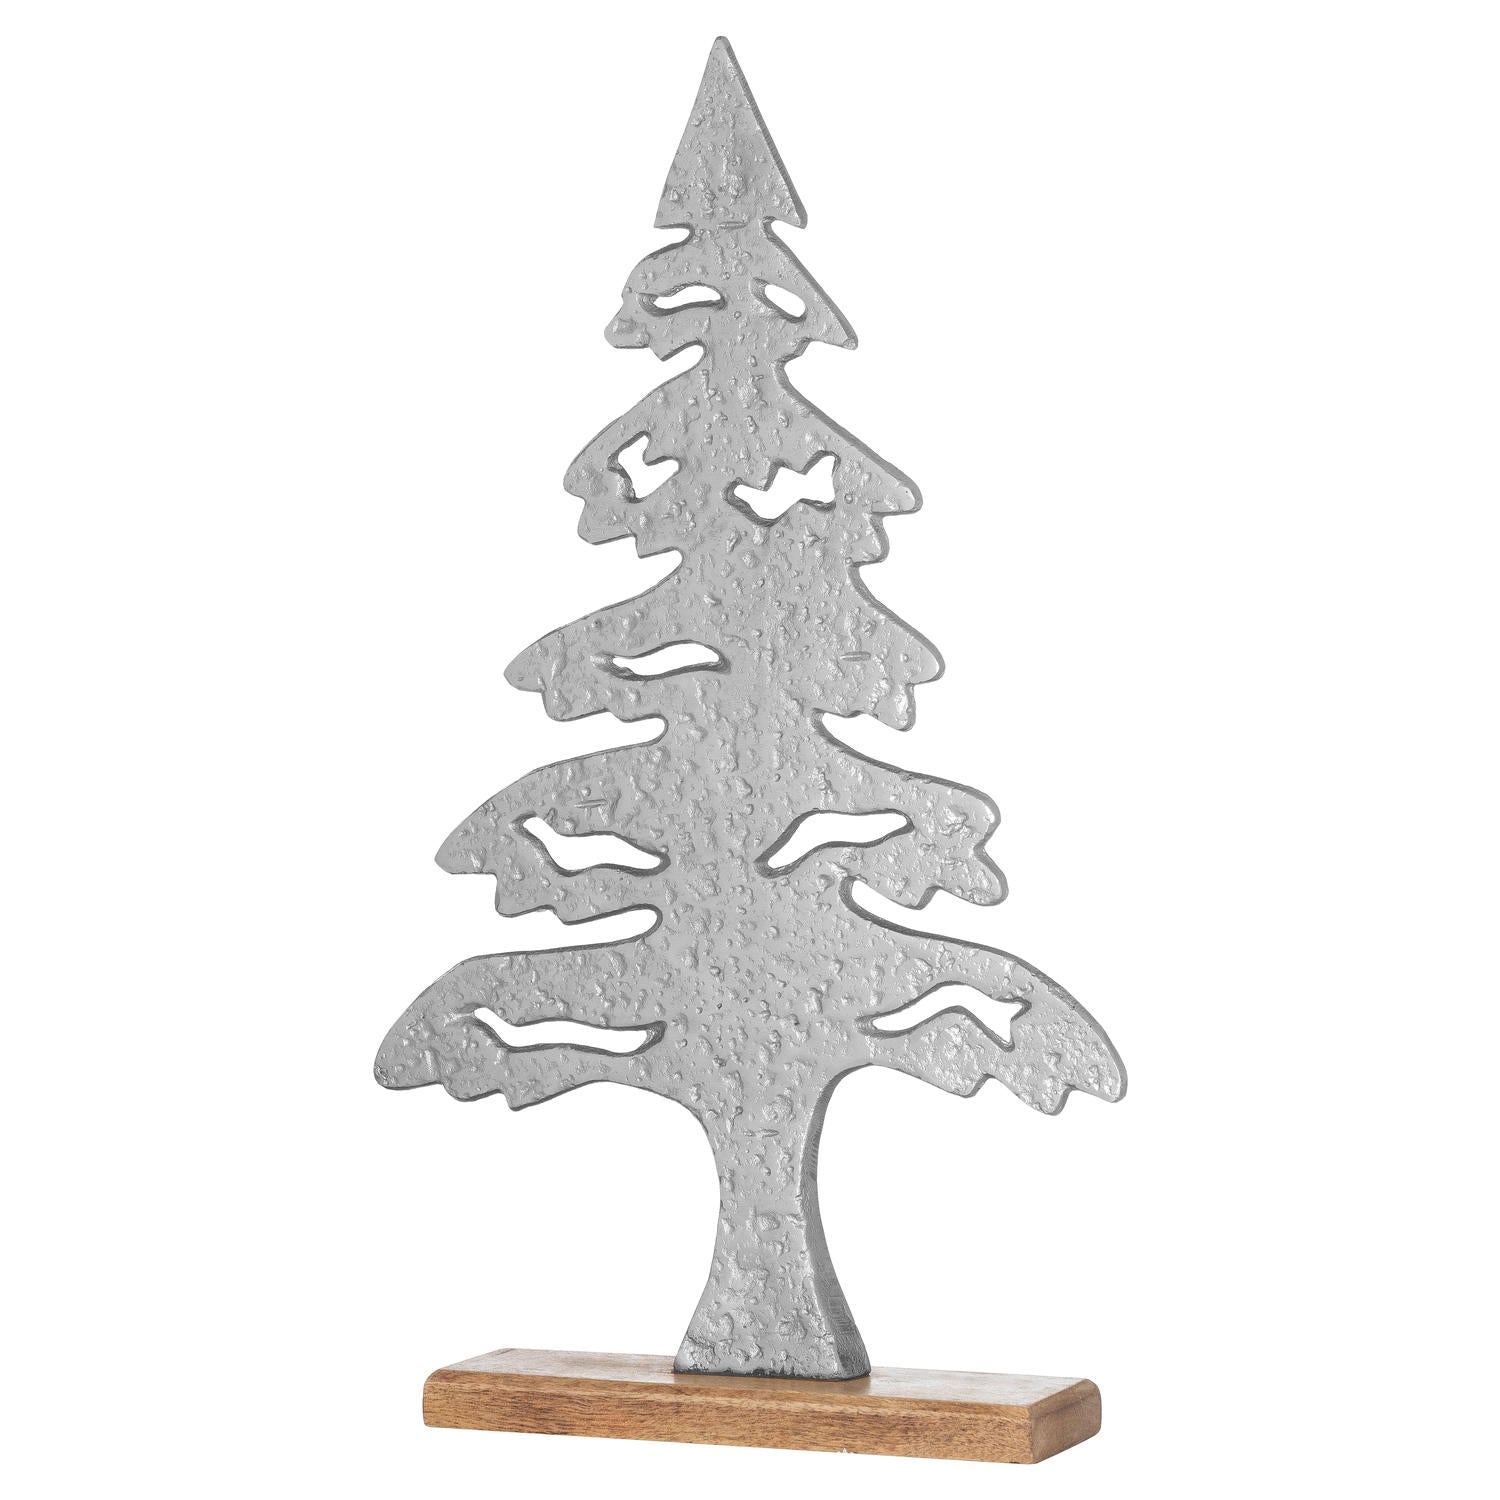 View The Noel Collection Large Cast Tree Ornament information